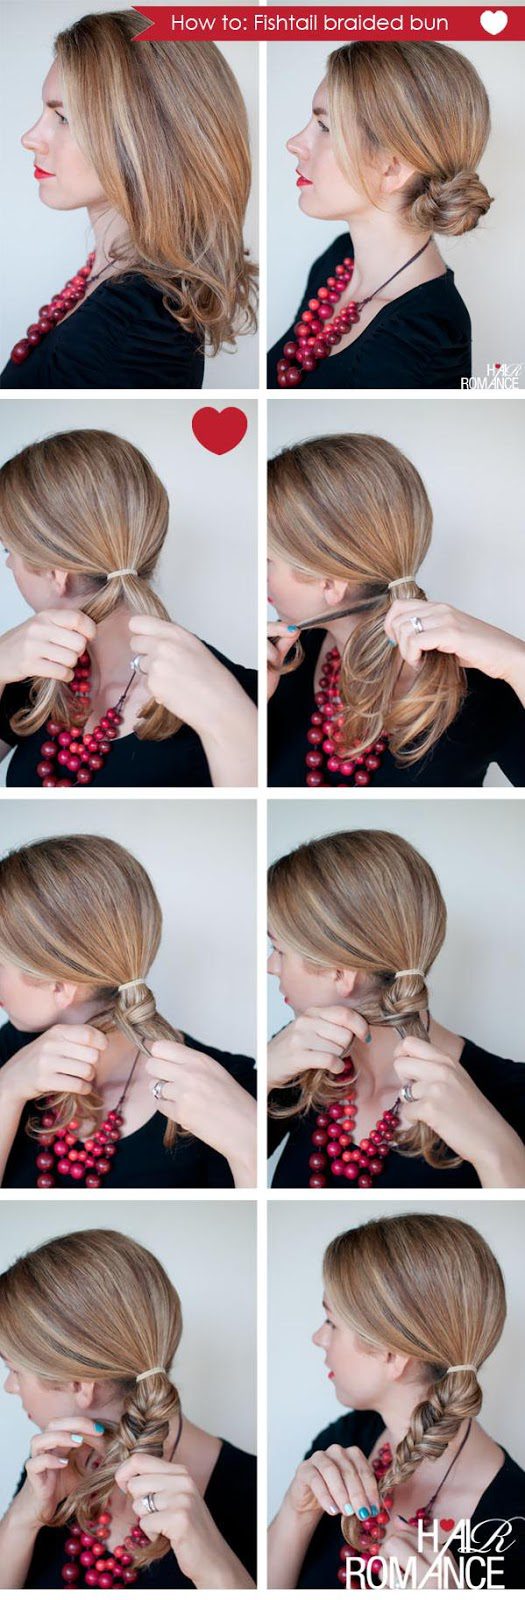 Braided Hairstyles And How To Do Them